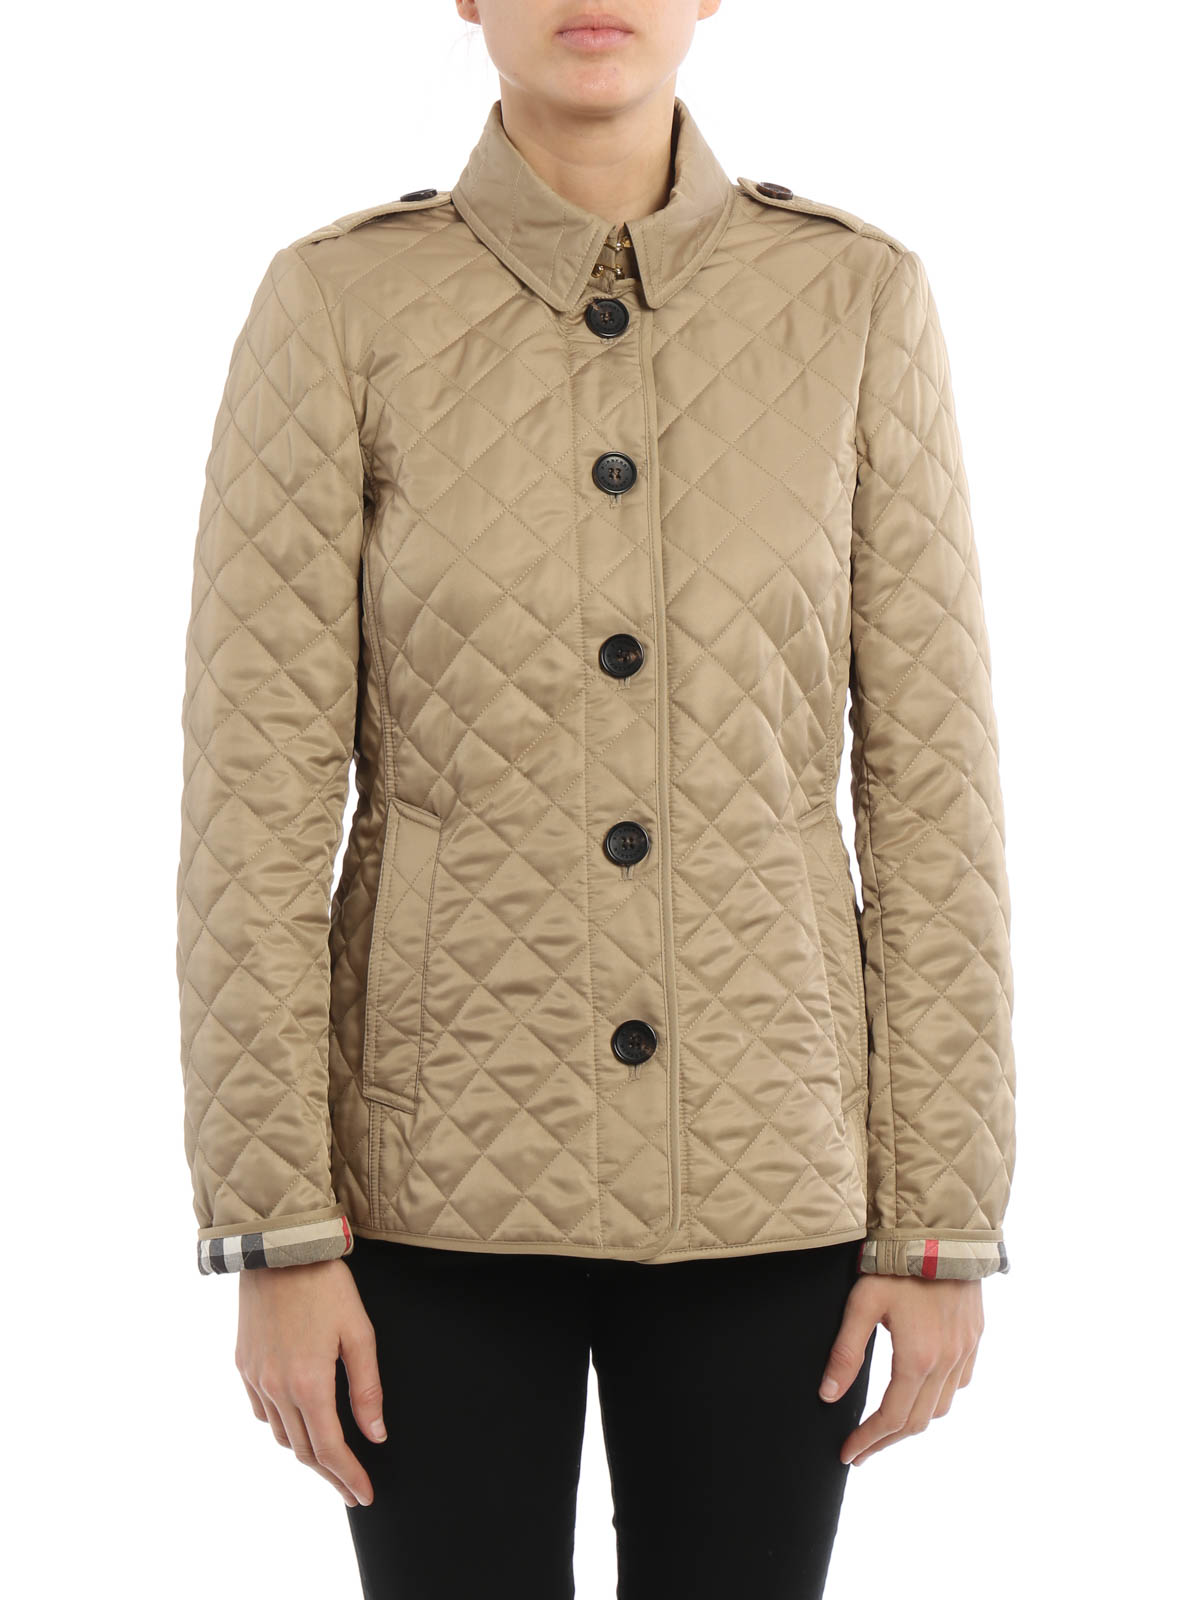 Burberry - Ashurst quilted jacket 